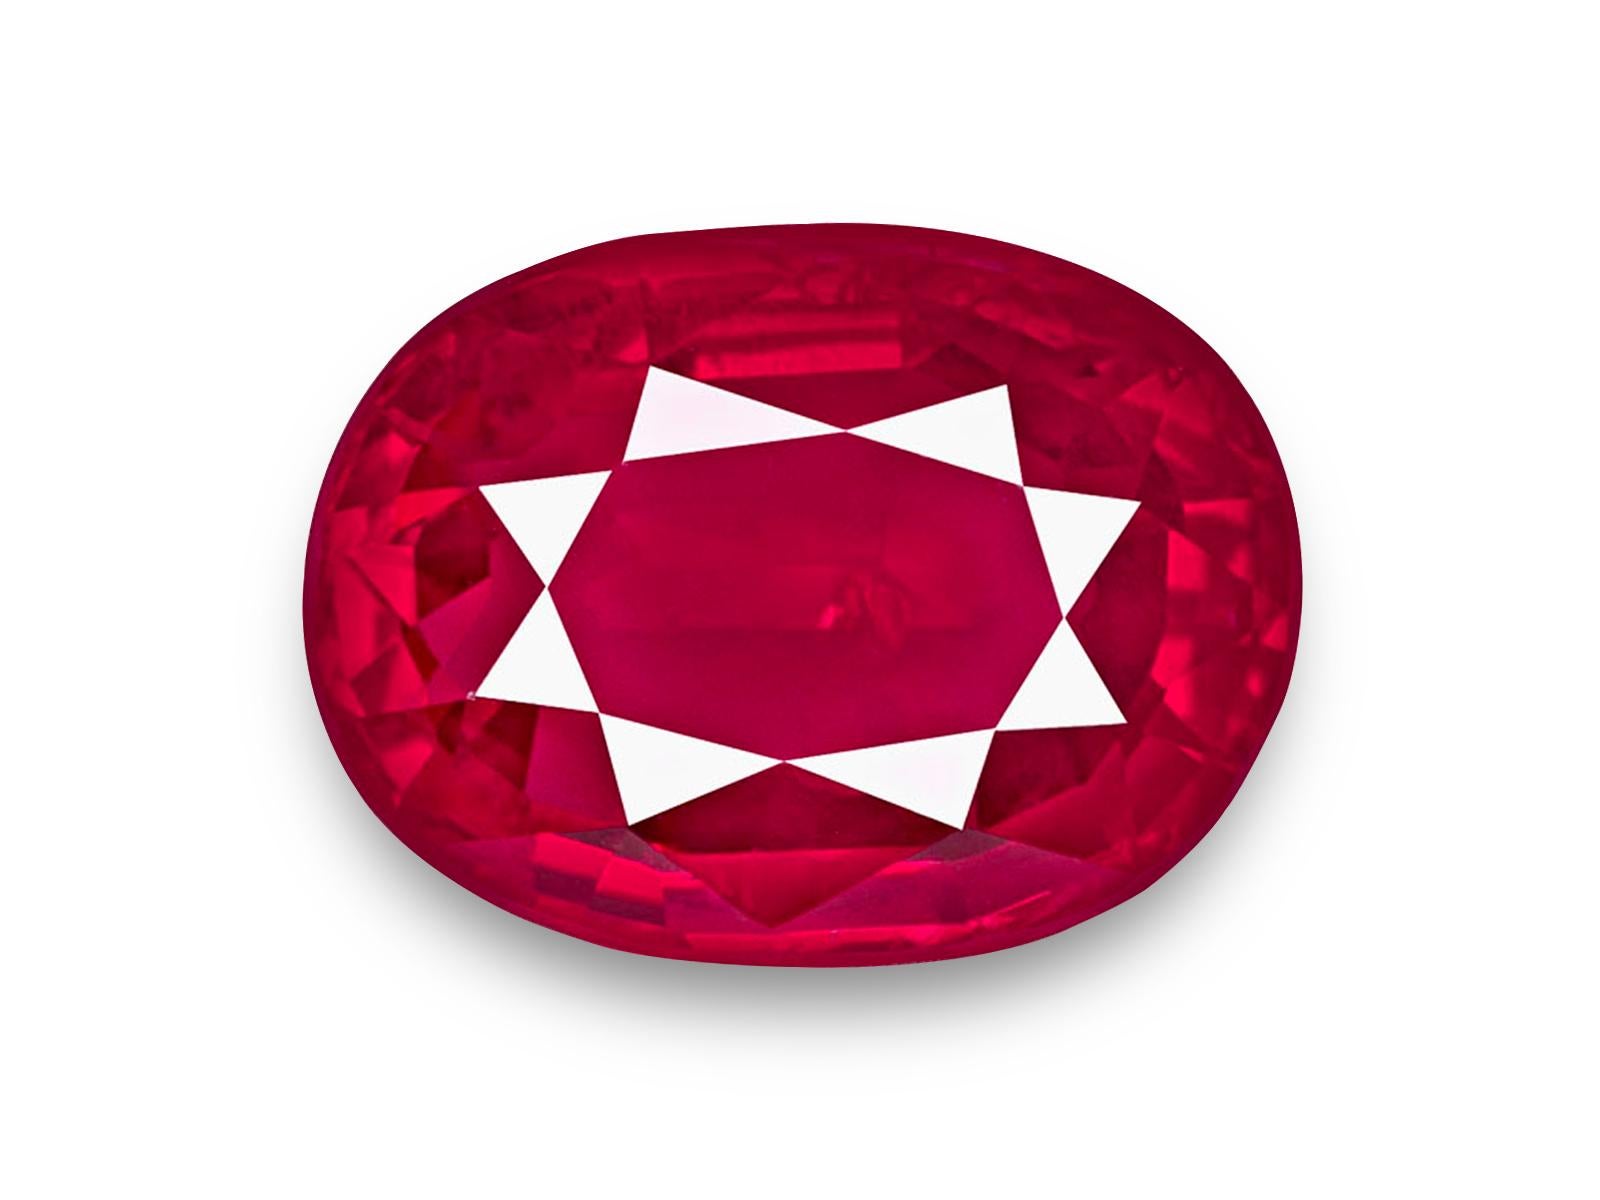 Antique Cushion Cut GIA Certified 5 Carat Unheated/Untreated Ruby from Mozambique For Sale